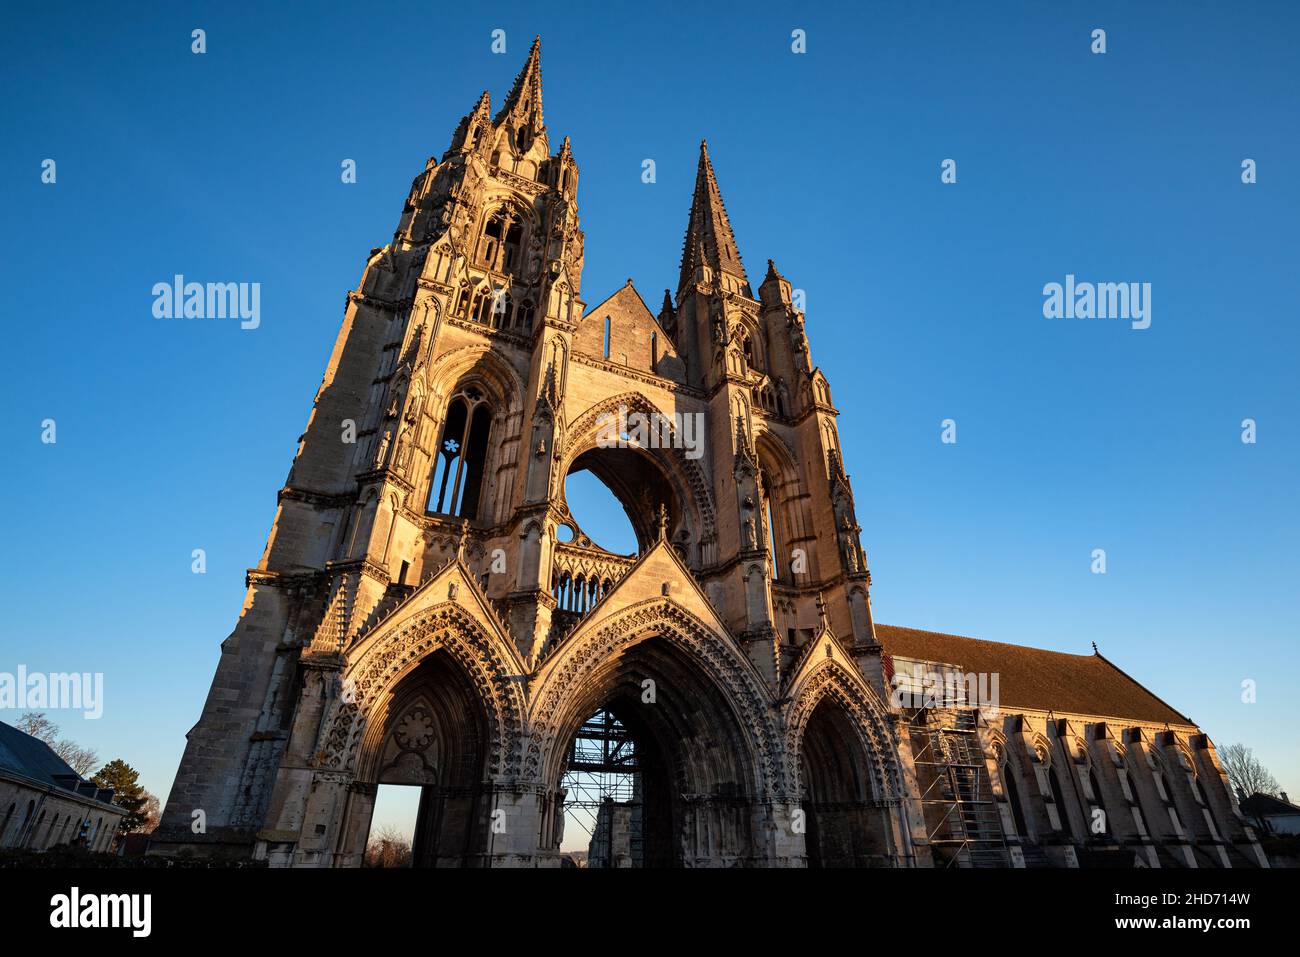 The Abbey of Saint Jean des Vignes at sunset, in Soissons, France. Listed historic monument, only ruins remain. Stock Photo